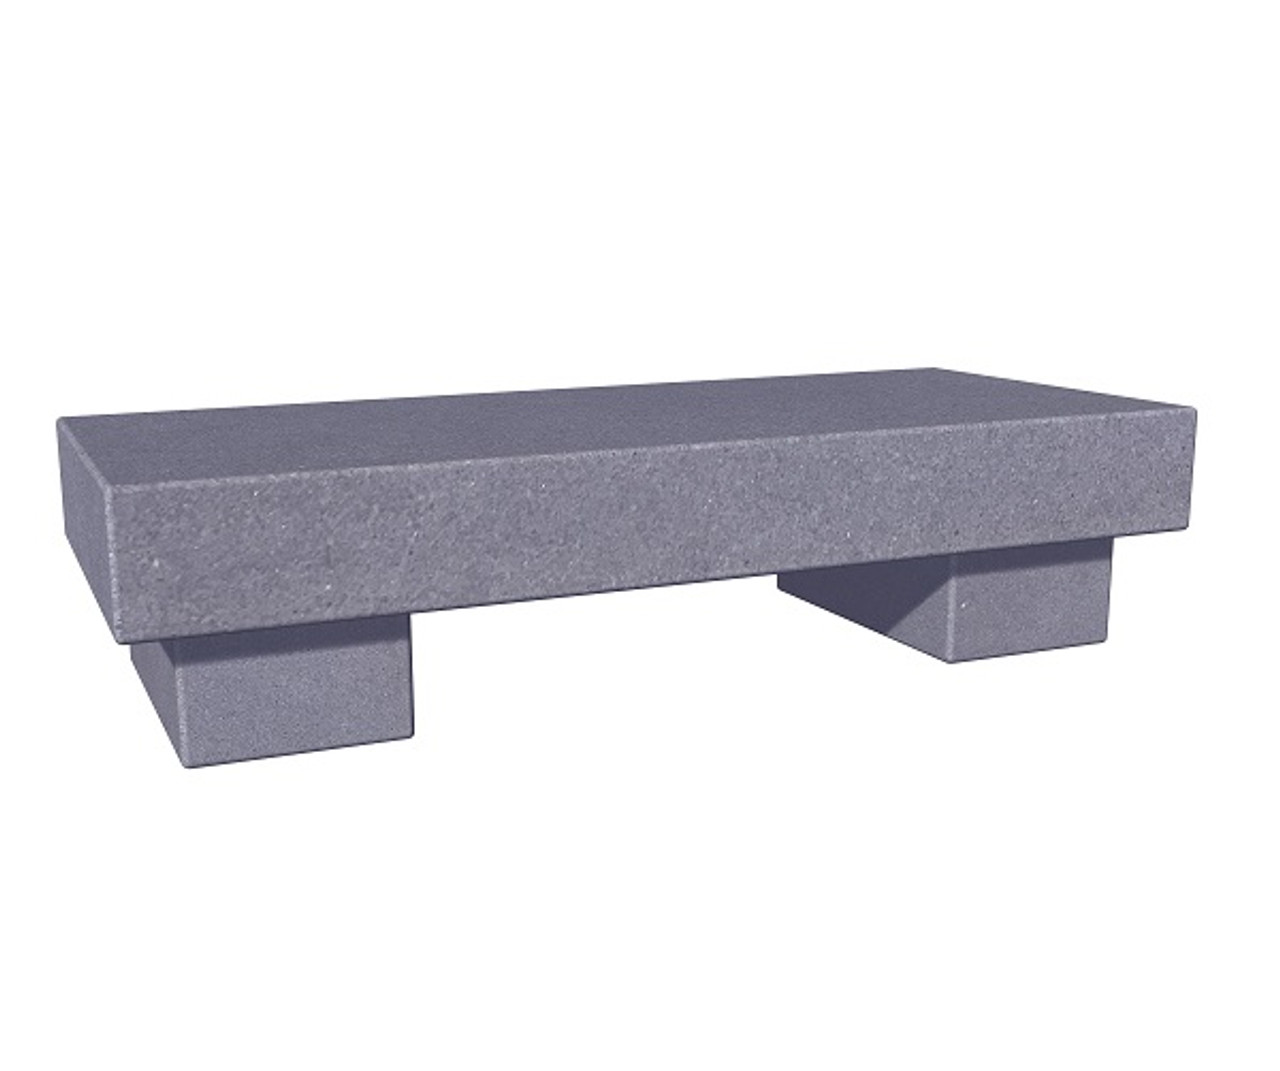 The Zen Bench in thermal bluestone, standard and customer size, available in many different natural stone colors, made to order in the USA and shipped nationwide.